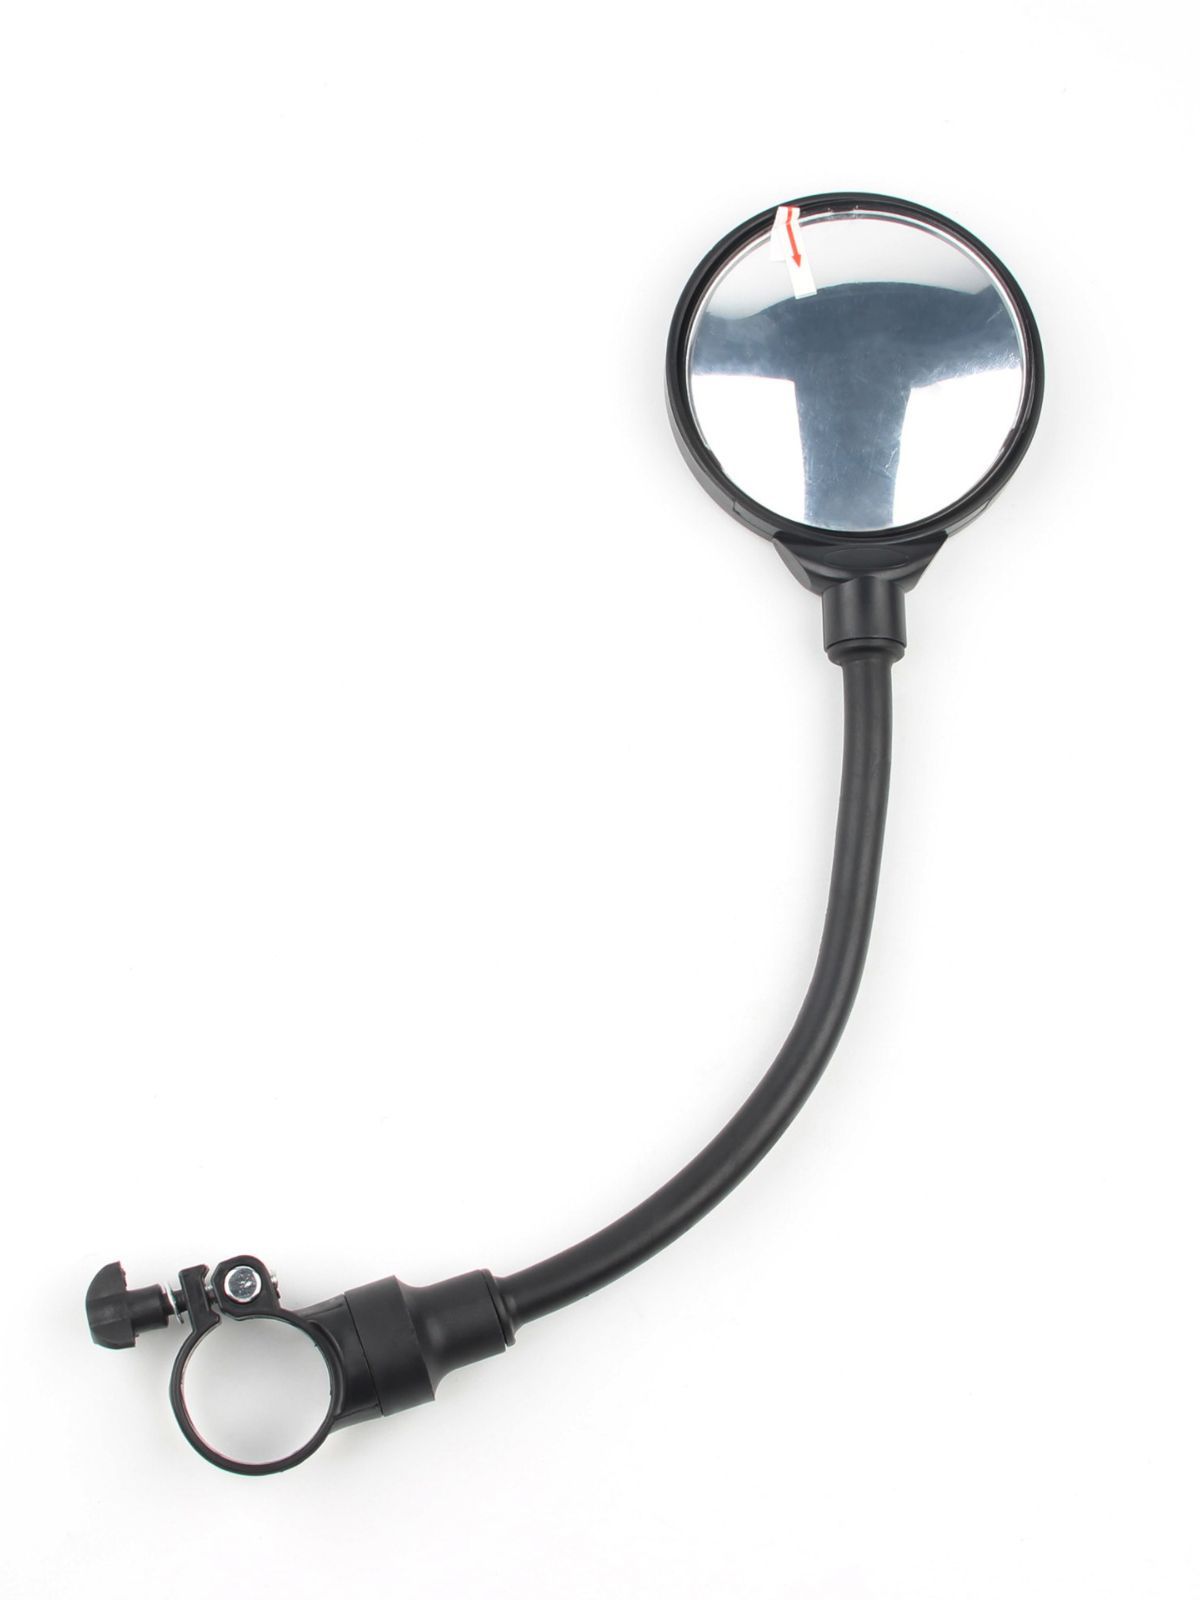 Enhance Your Cycling Experience with the Handlebar Bike Mirror - Bike Reflective Mirror - 2